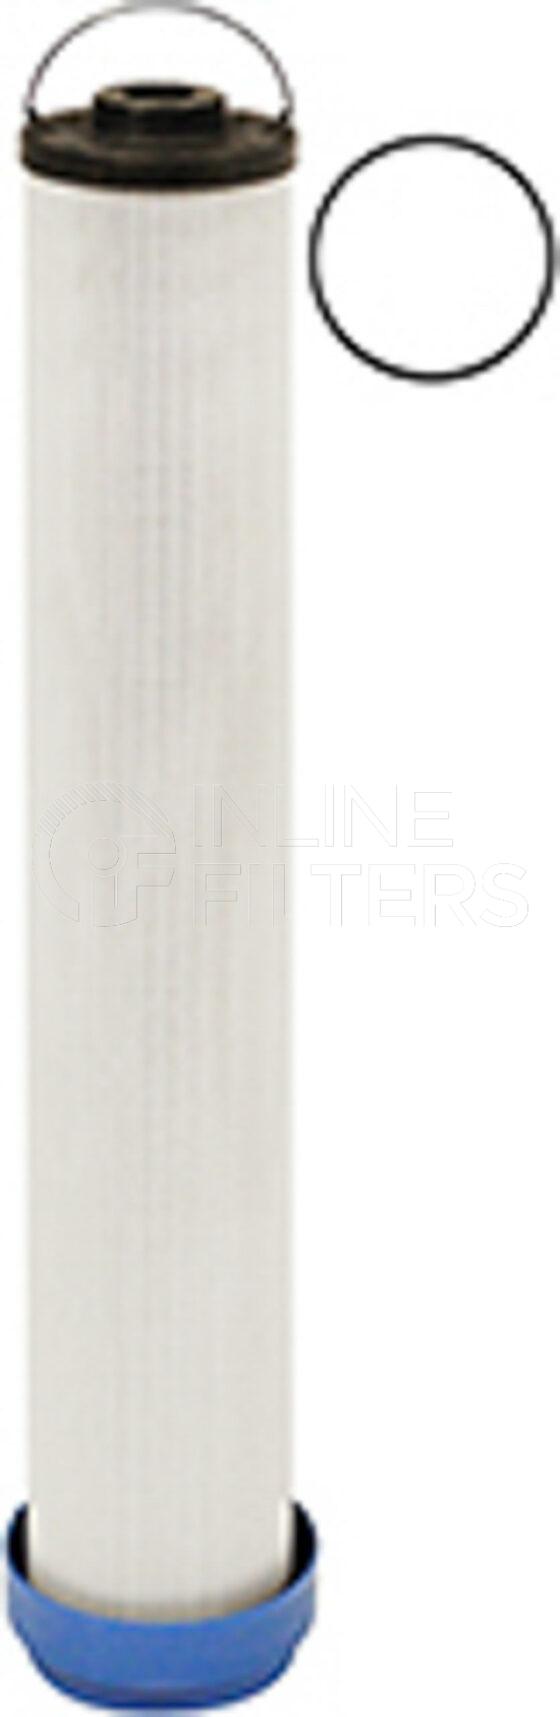 Inline FH50971. Hydraulic Filter Product – Cartridge – O- Ring Product Hydraulic filter product